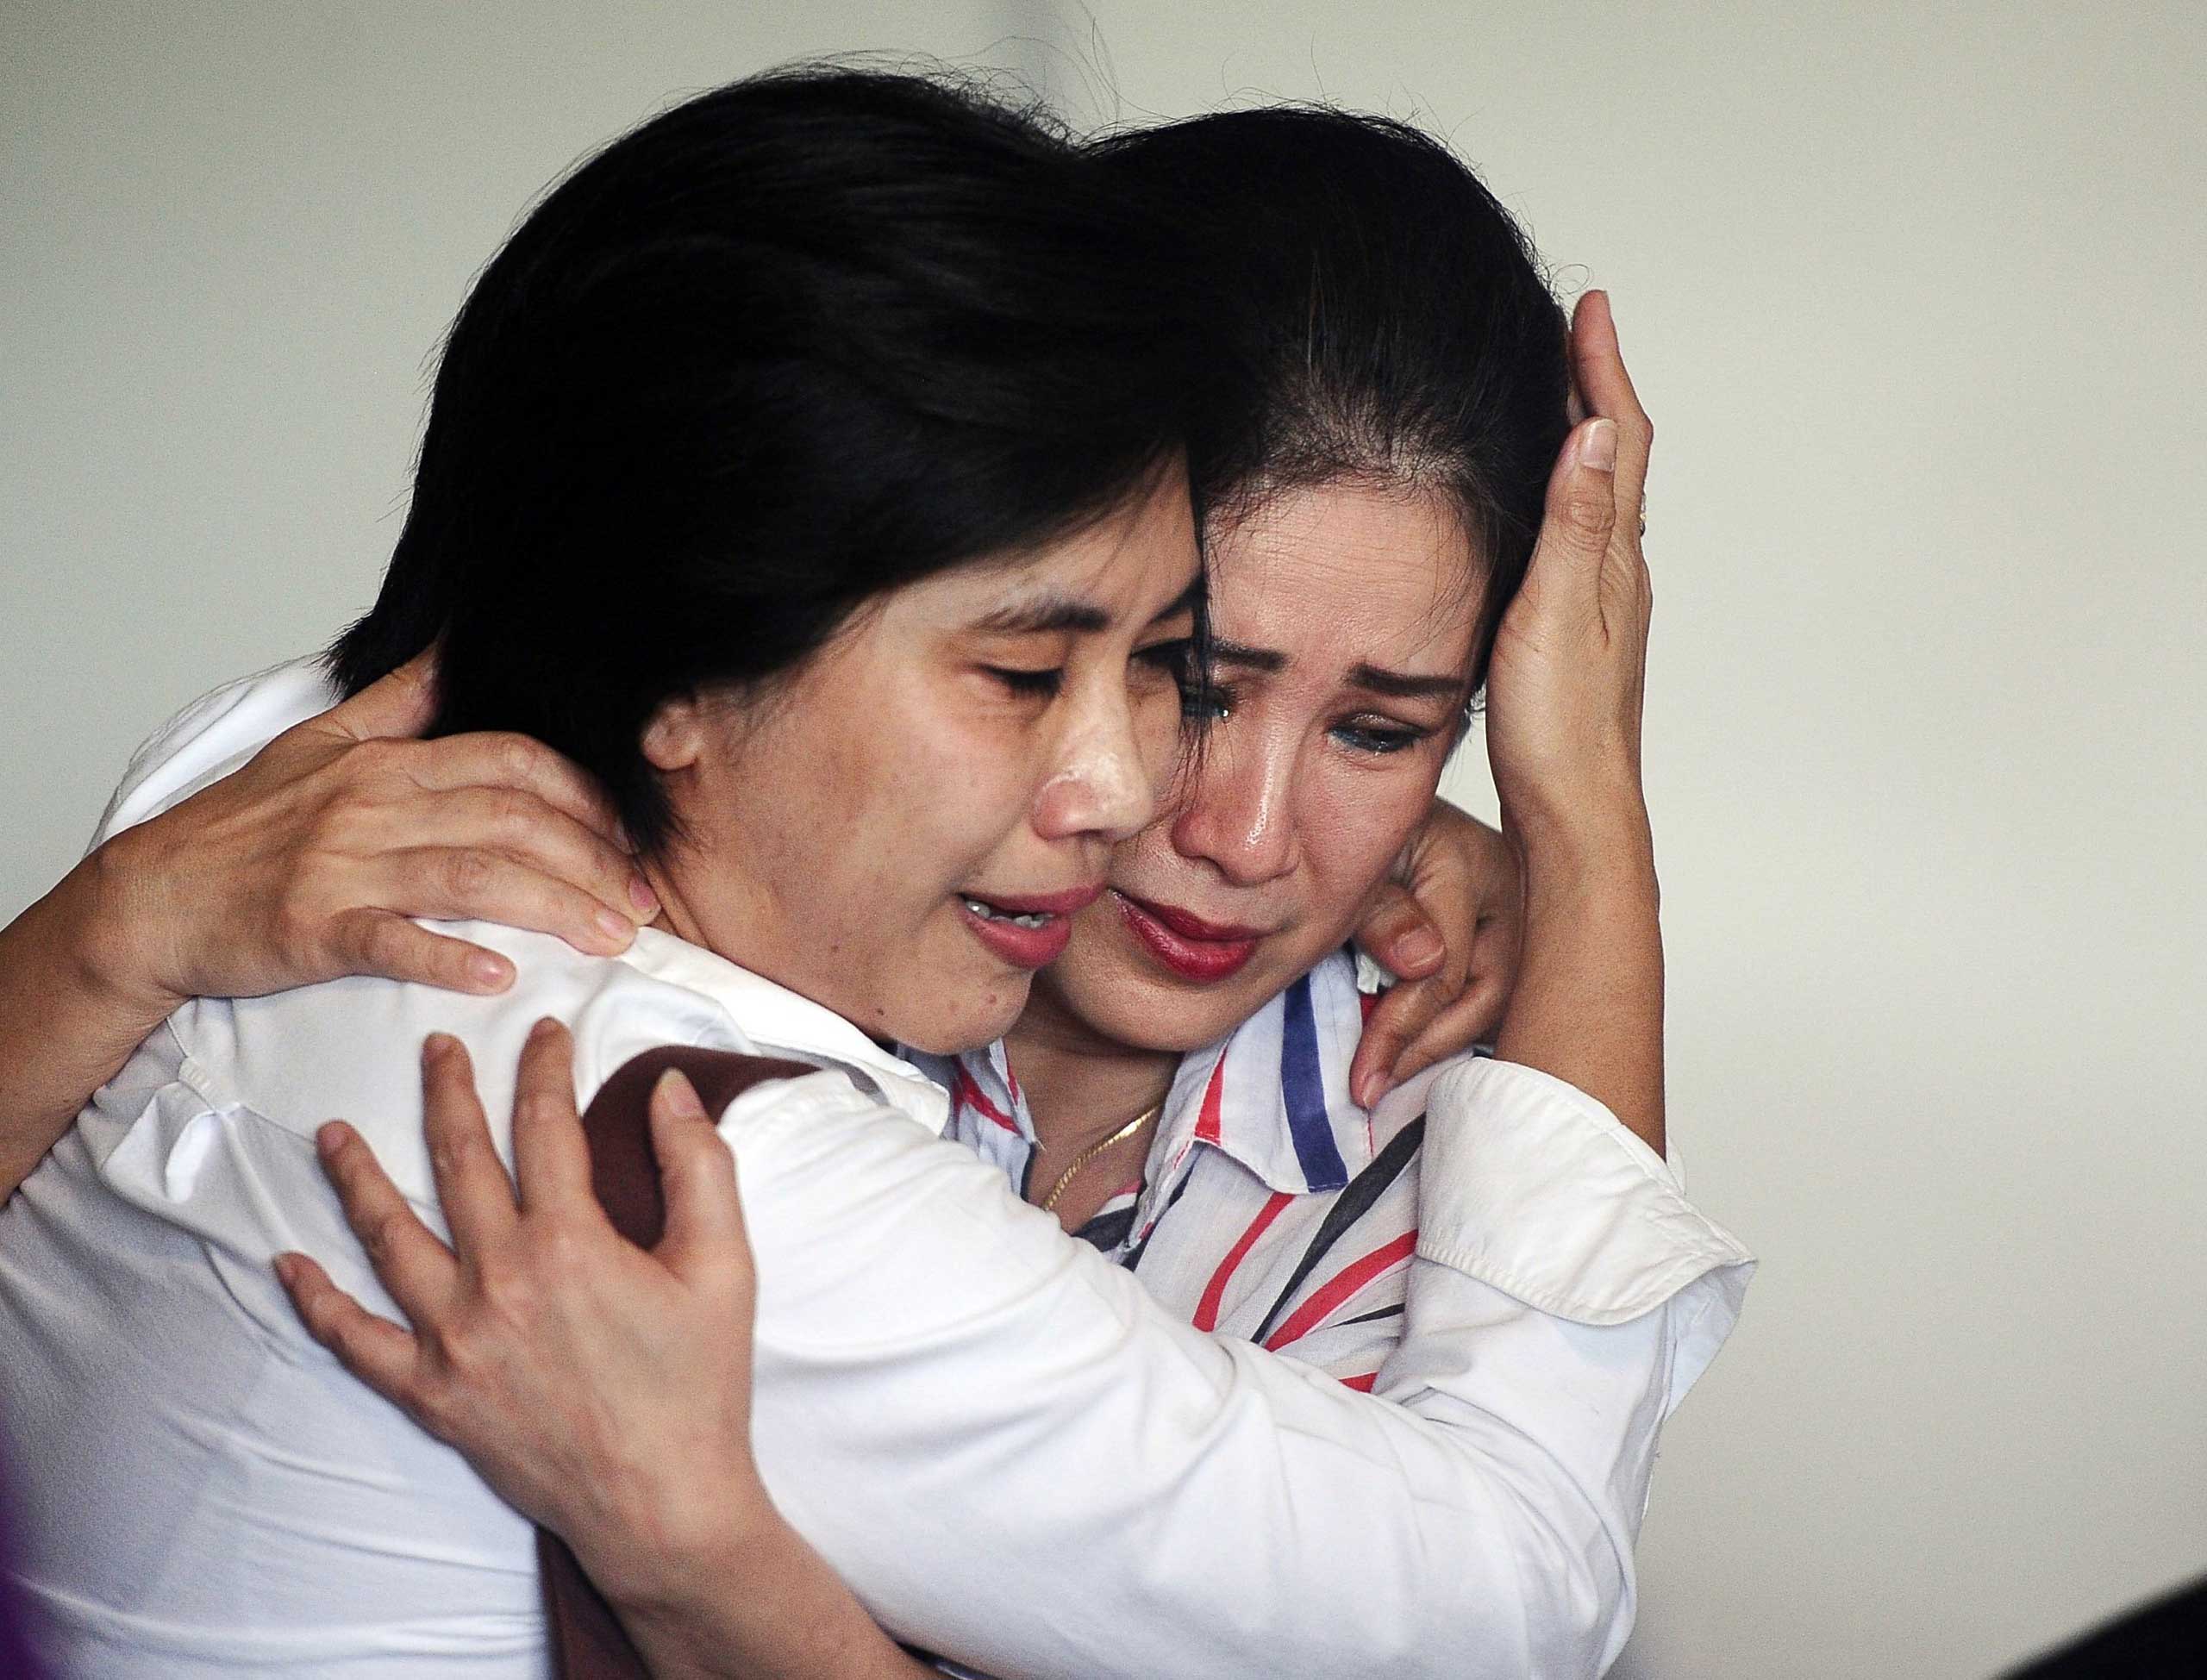 Relatives of passengers on AirAsia flight QZ 8501 react to the news of debris and bodies being found, in Surabaya, Indonesia on Dec. 30, 2014.